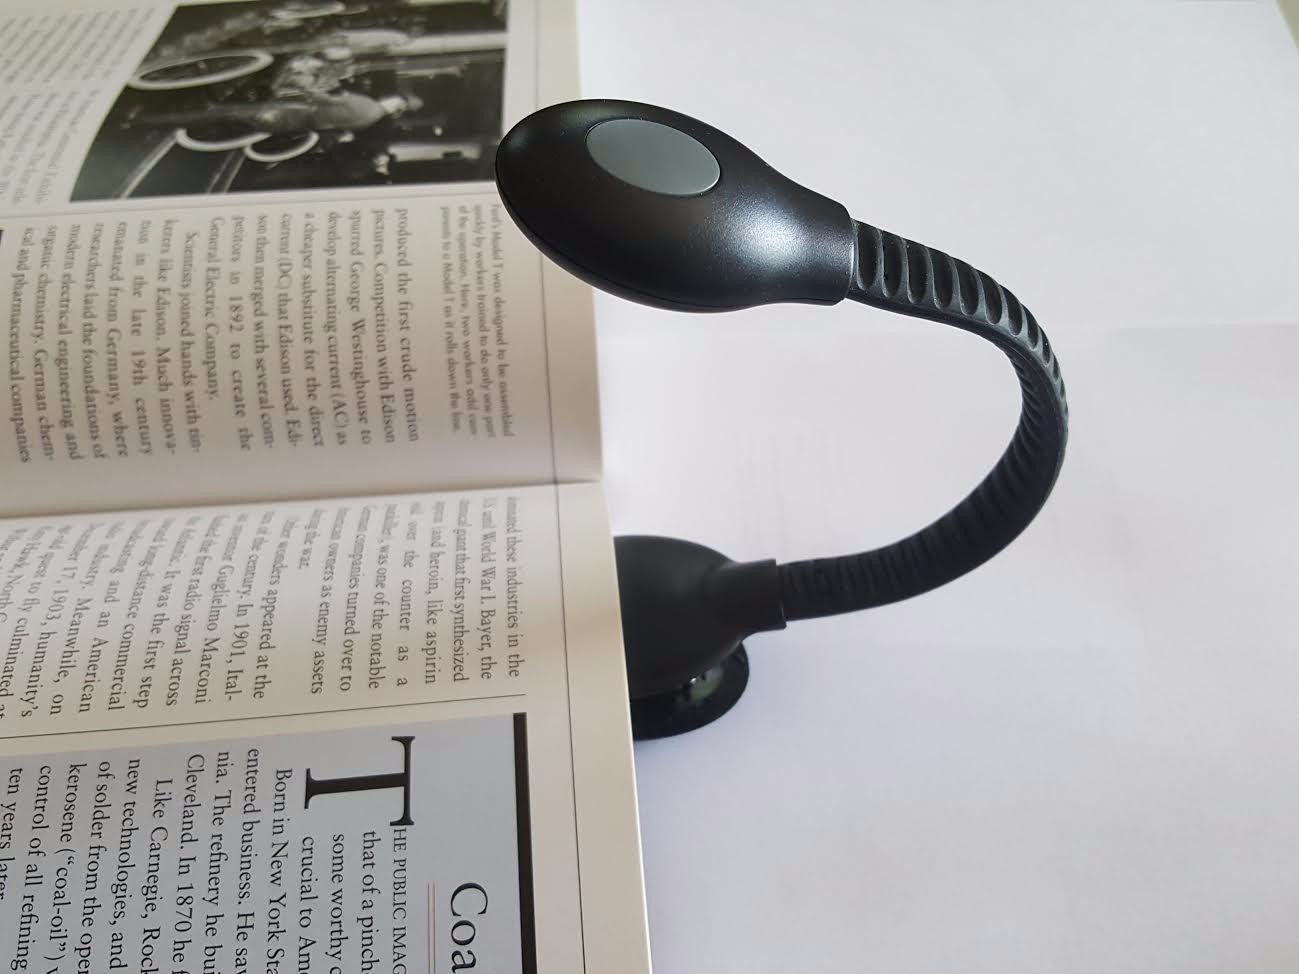 Charge LED Book Light Clip On